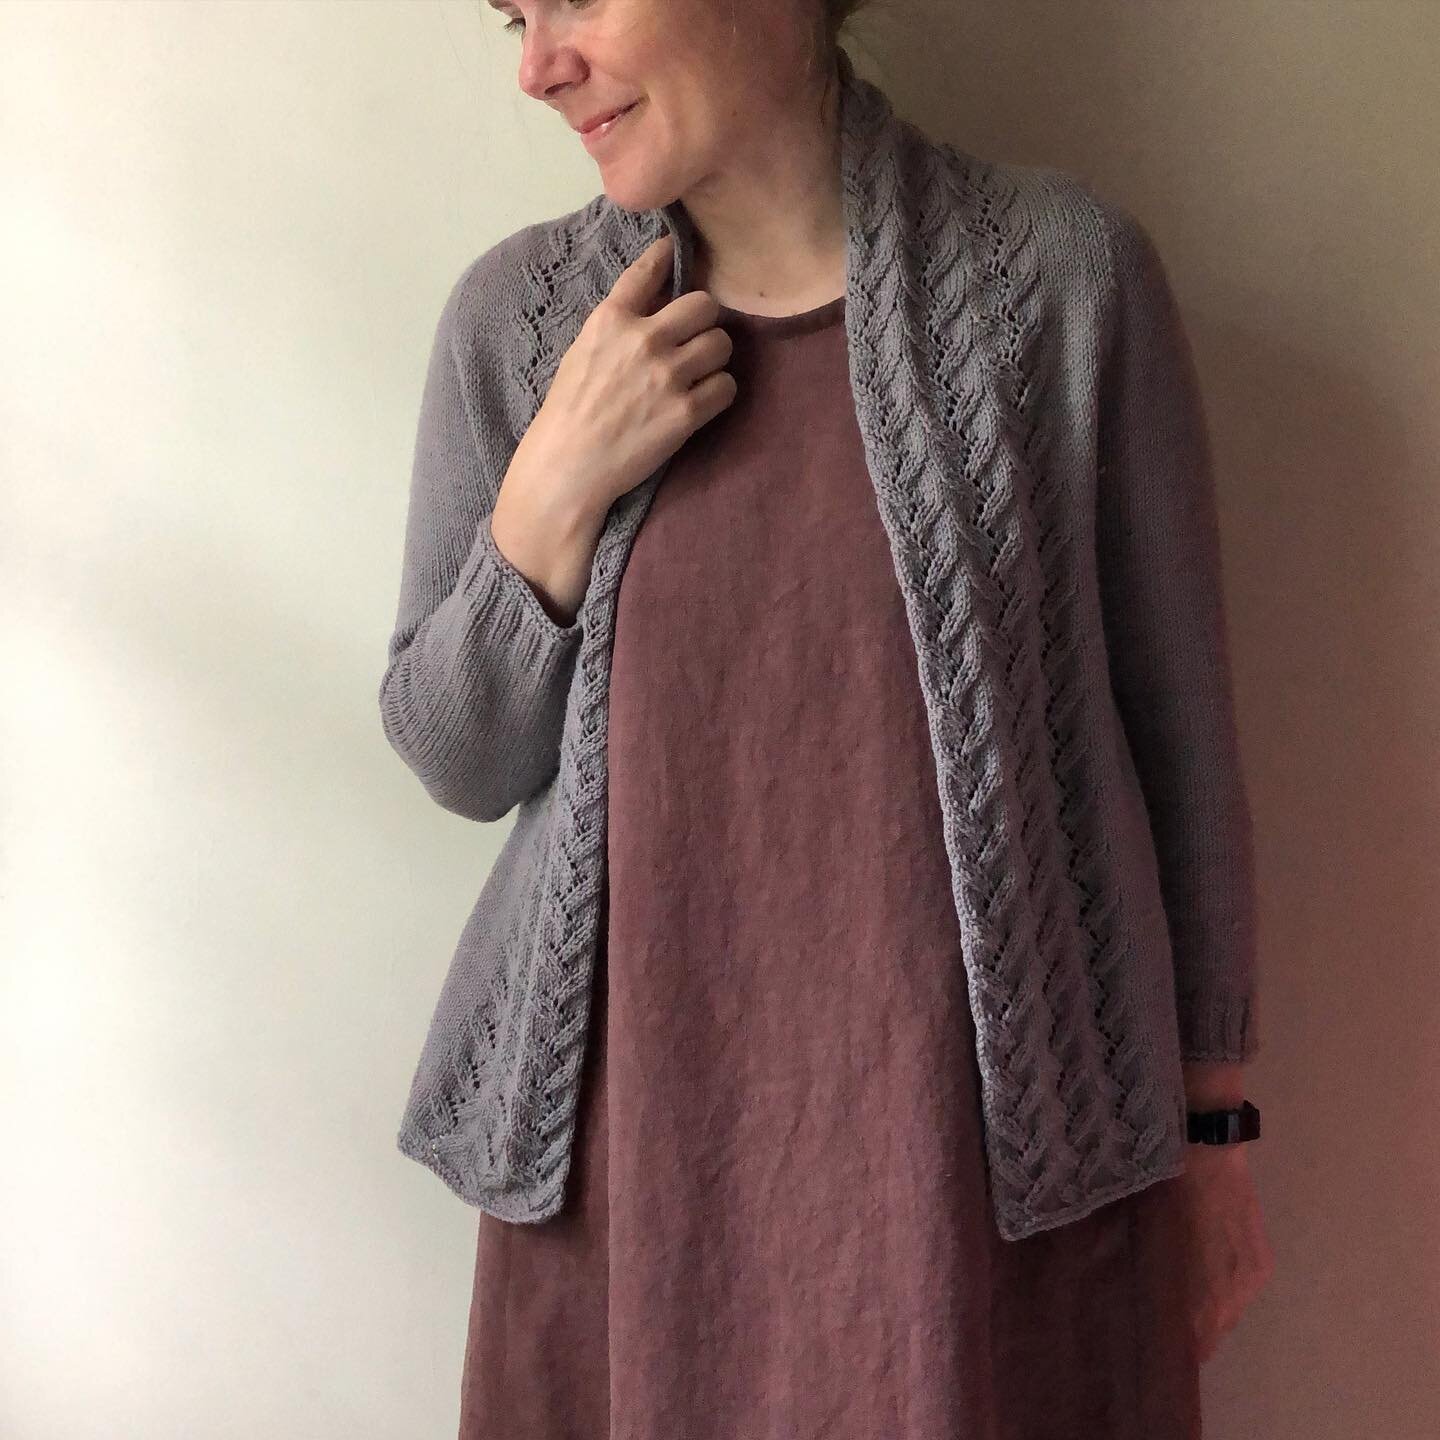 better late than never: five plus years after purchasing the #florencecardigan pattern by @maddermade, i finallllly knit one up! with 3/4 sleeves, a shawl collar and @quinceandco&rsquo;s tern yarn, it&rsquo;s an ideal sweater for these warmer months.